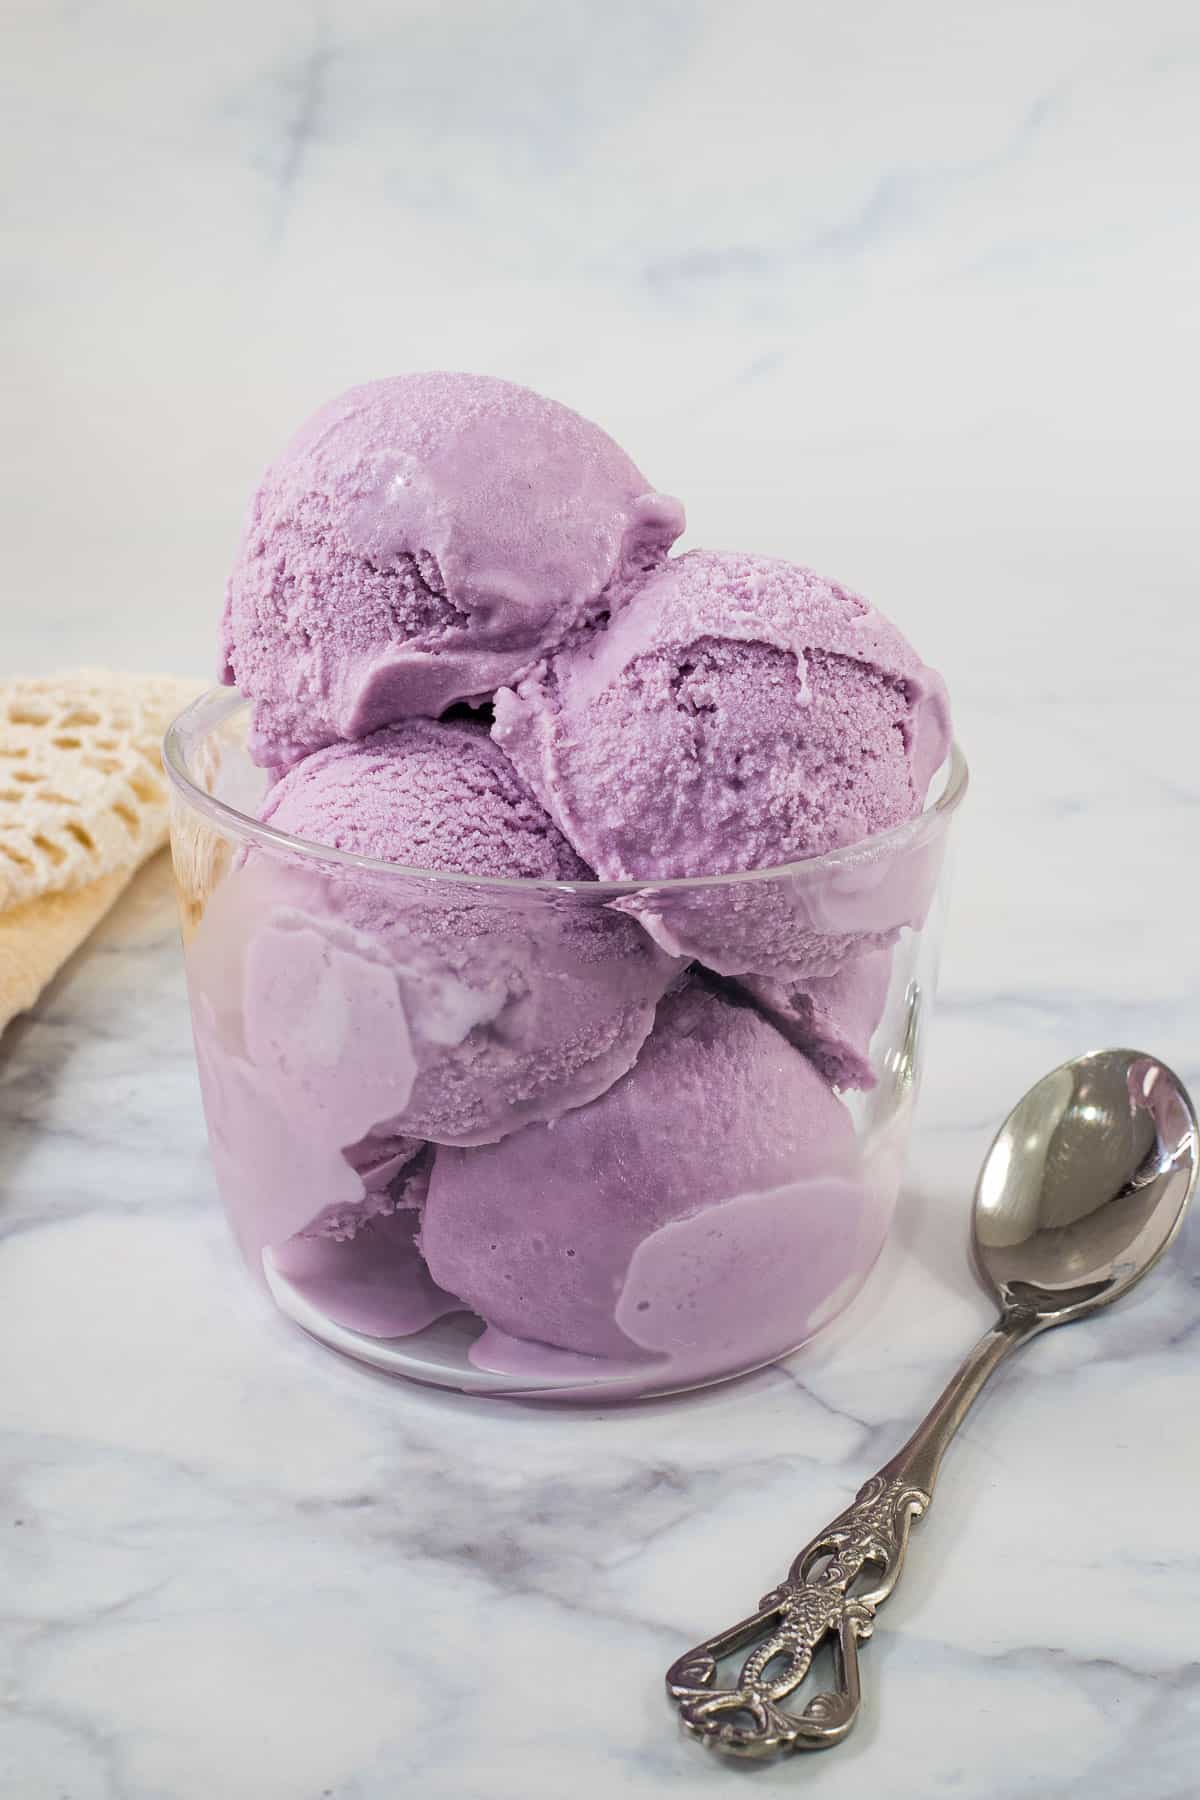 Scoops of purple ube ice cream in a transparent glass